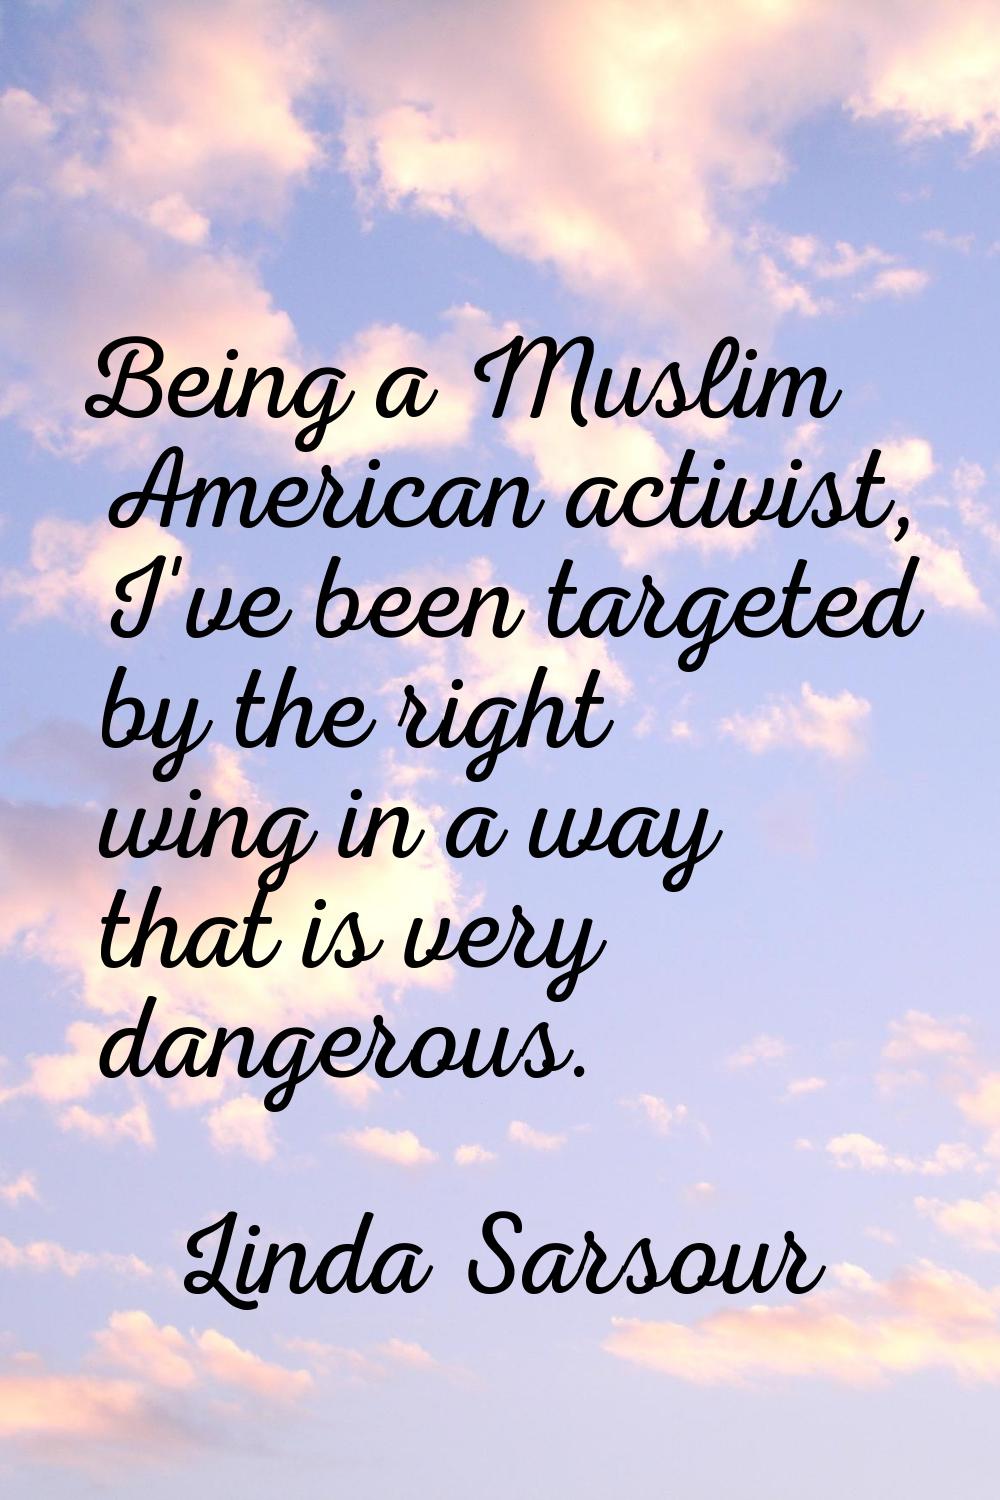 Being a Muslim American activist, I've been targeted by the right wing in a way that is very danger